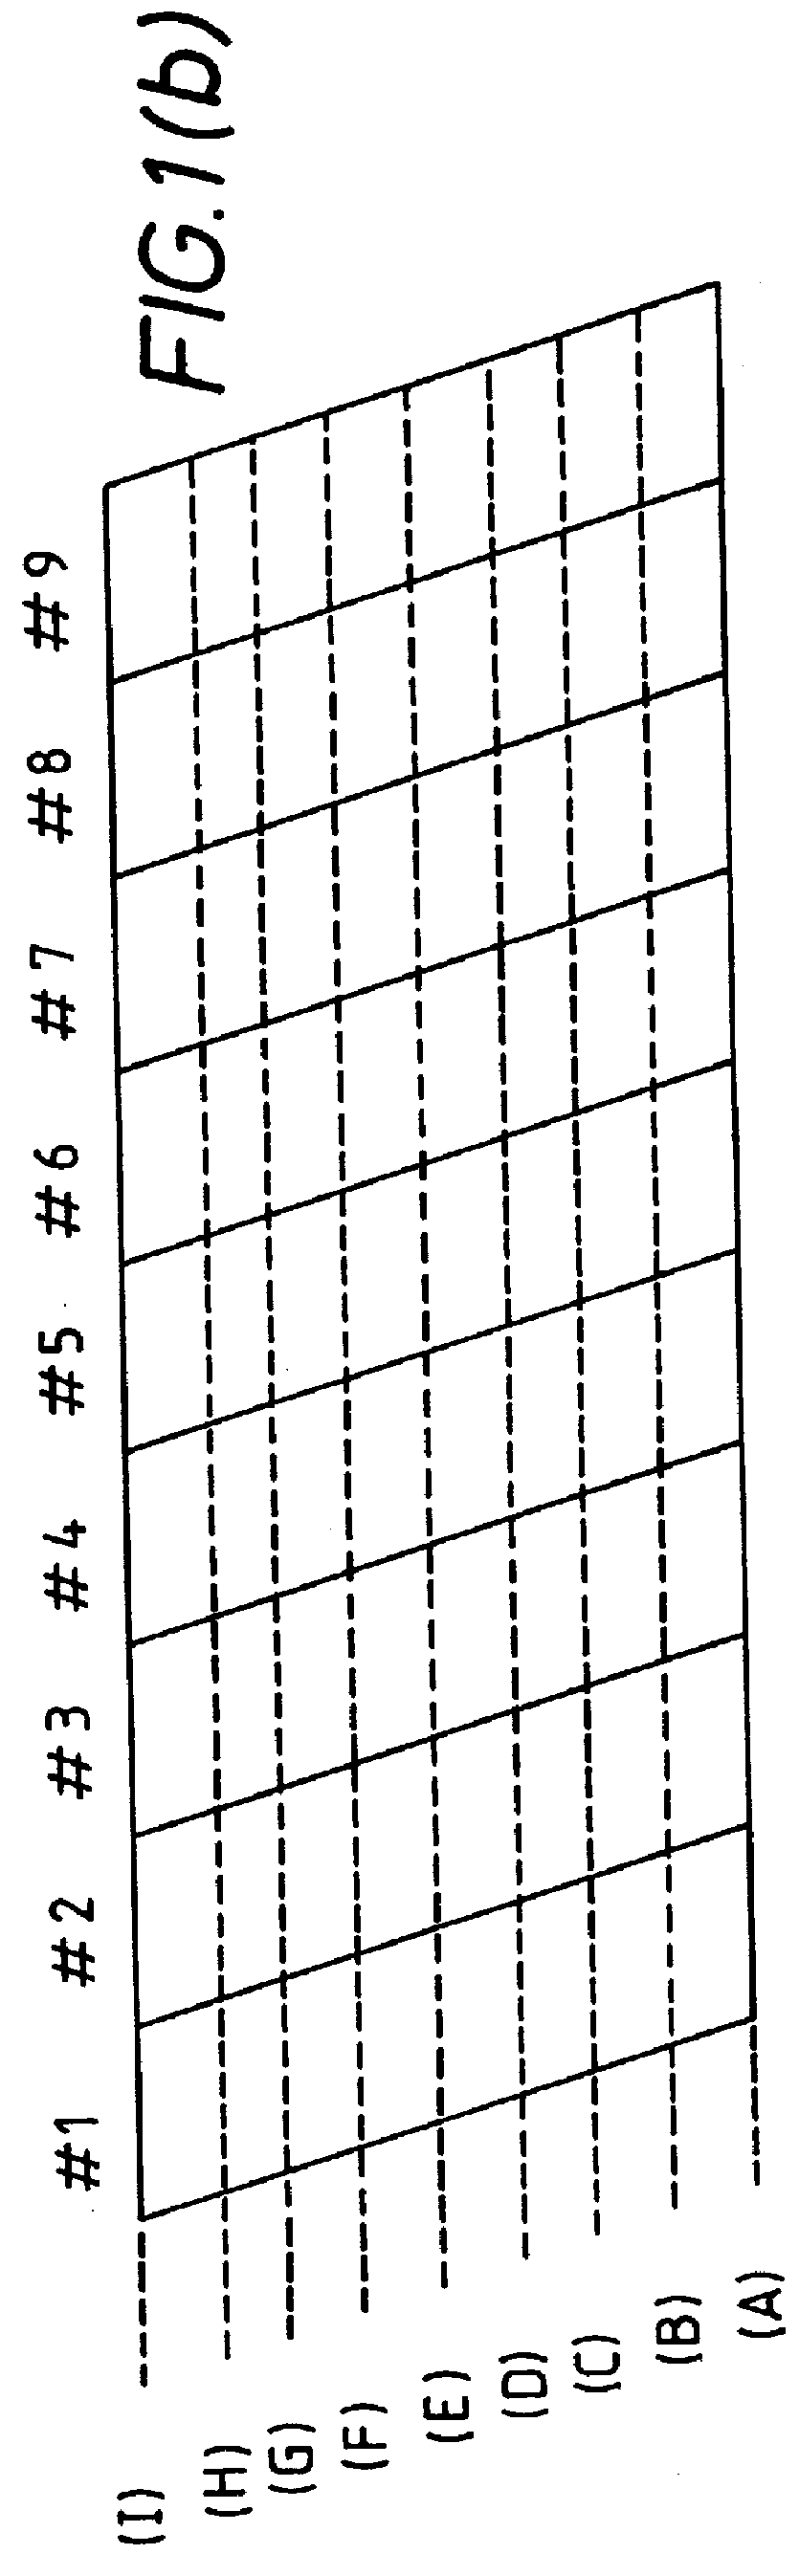 Digital signal recording and playback apparatus for inter-frame and intra-frame compression data